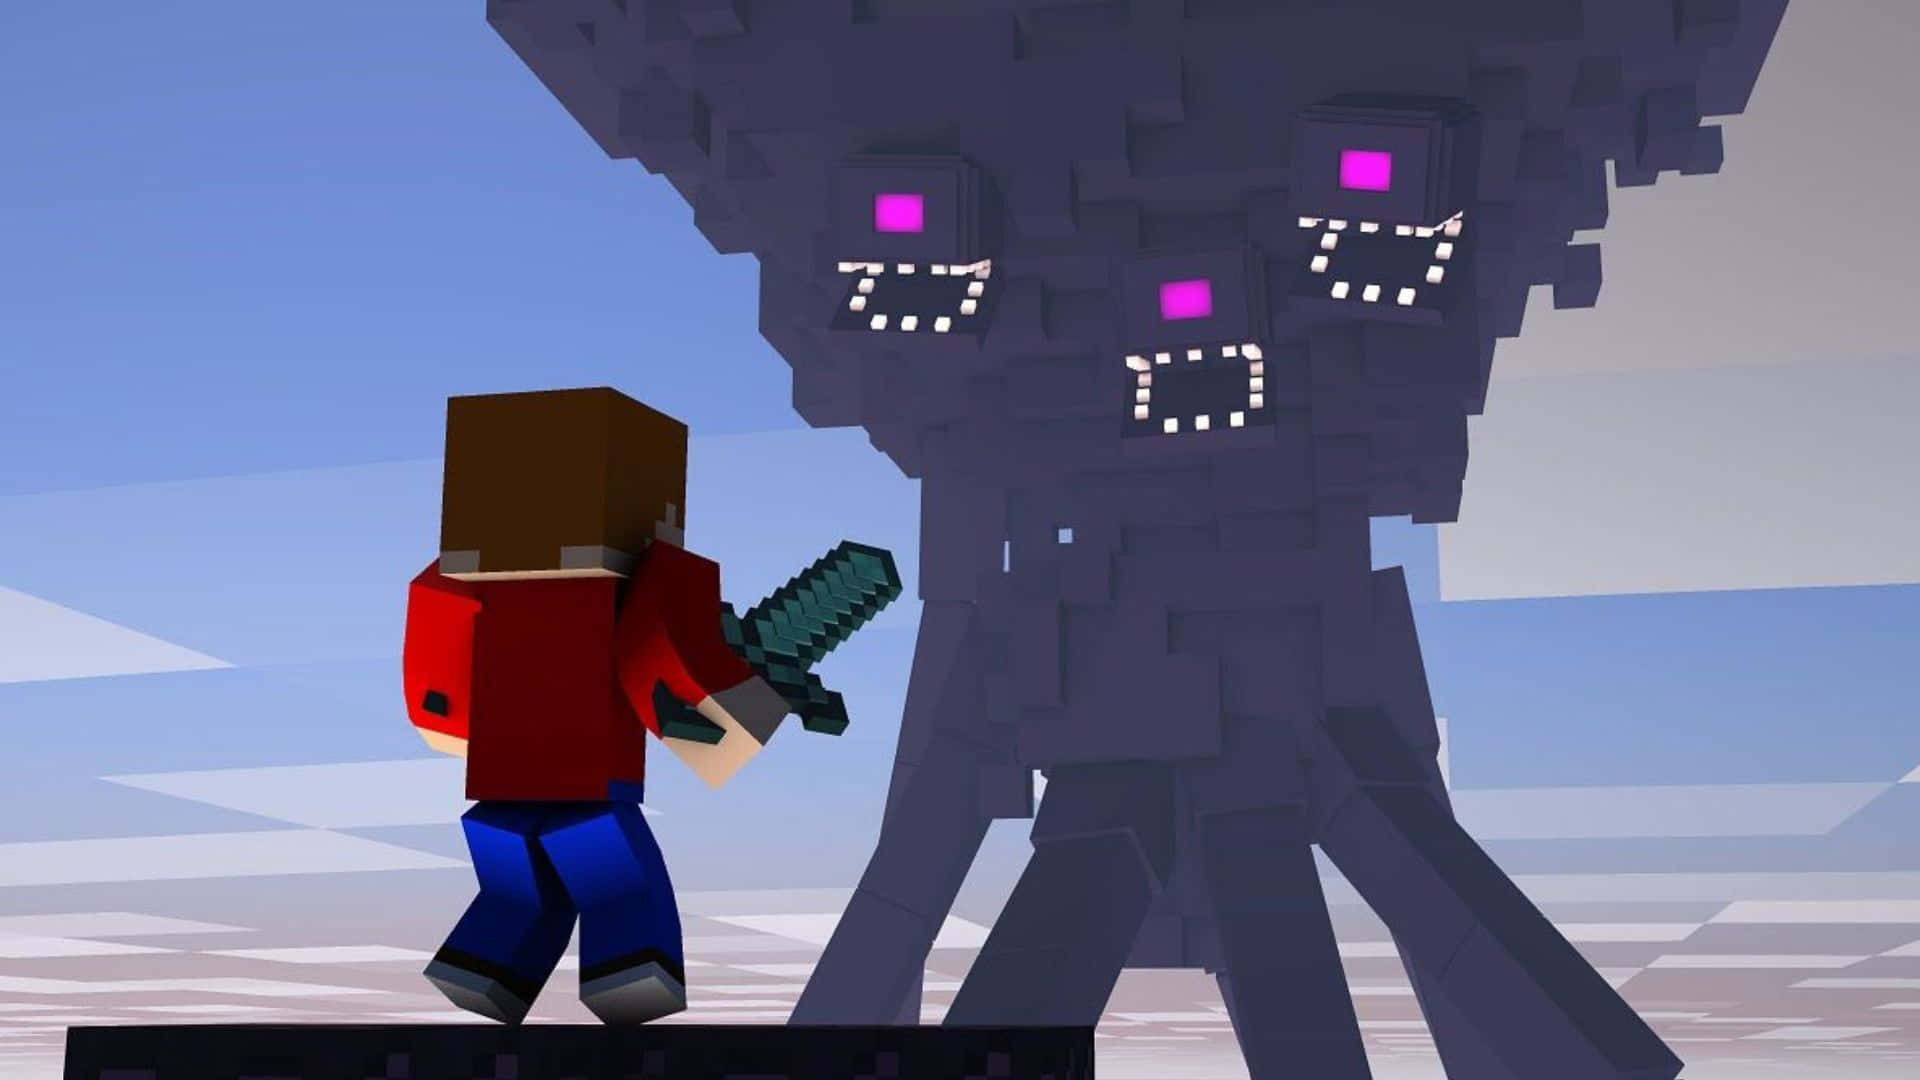 The Wither, a fearsome and powerful boss in Minecraft, unleashes destruction in an epic high-definition capture Wallpaper